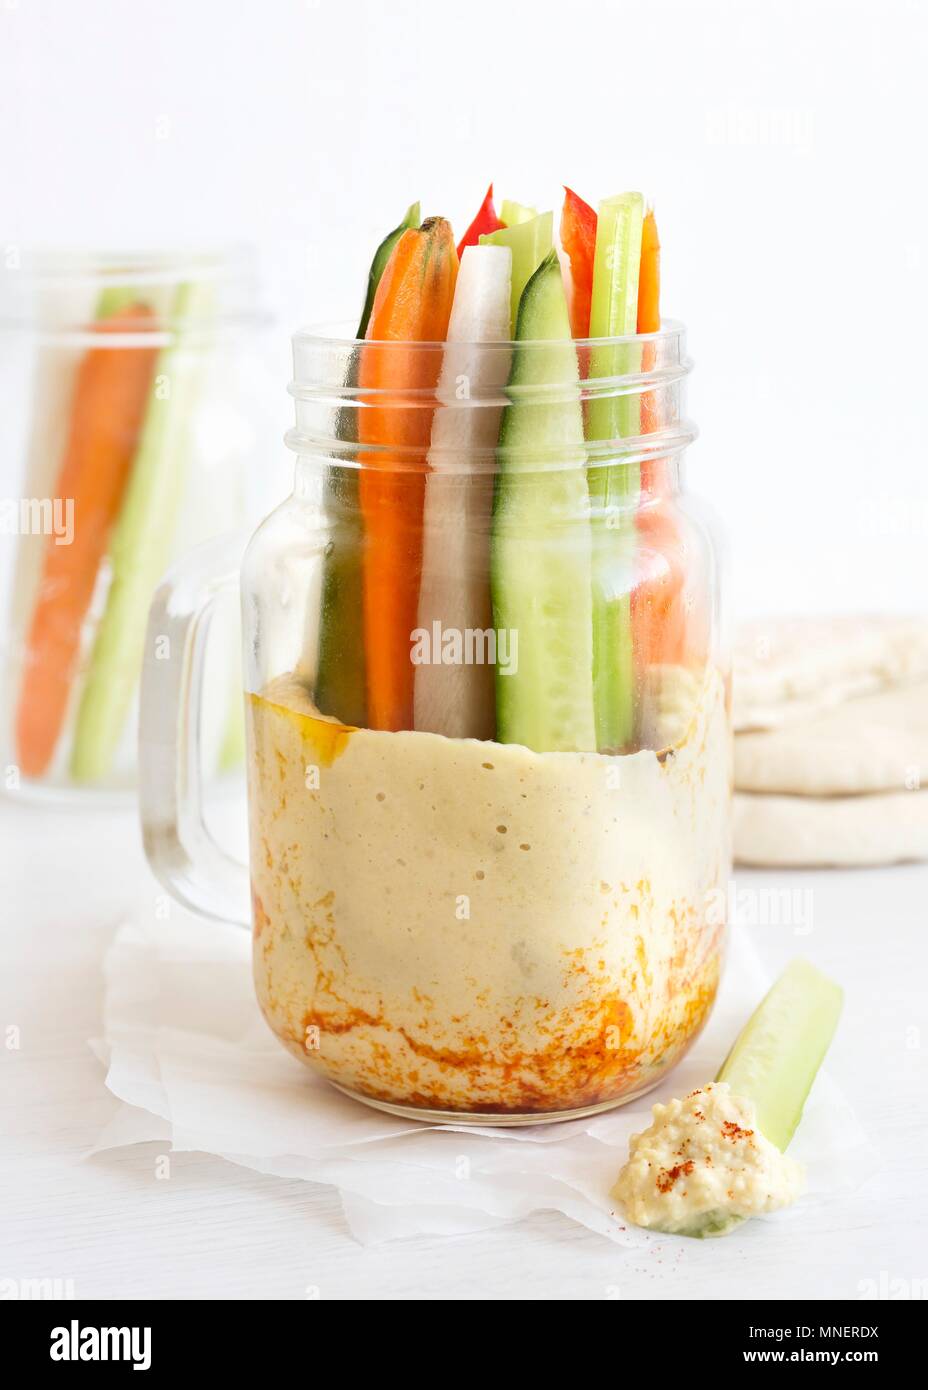 Vegetable sticks in a glass jar with houmous Stock Photo